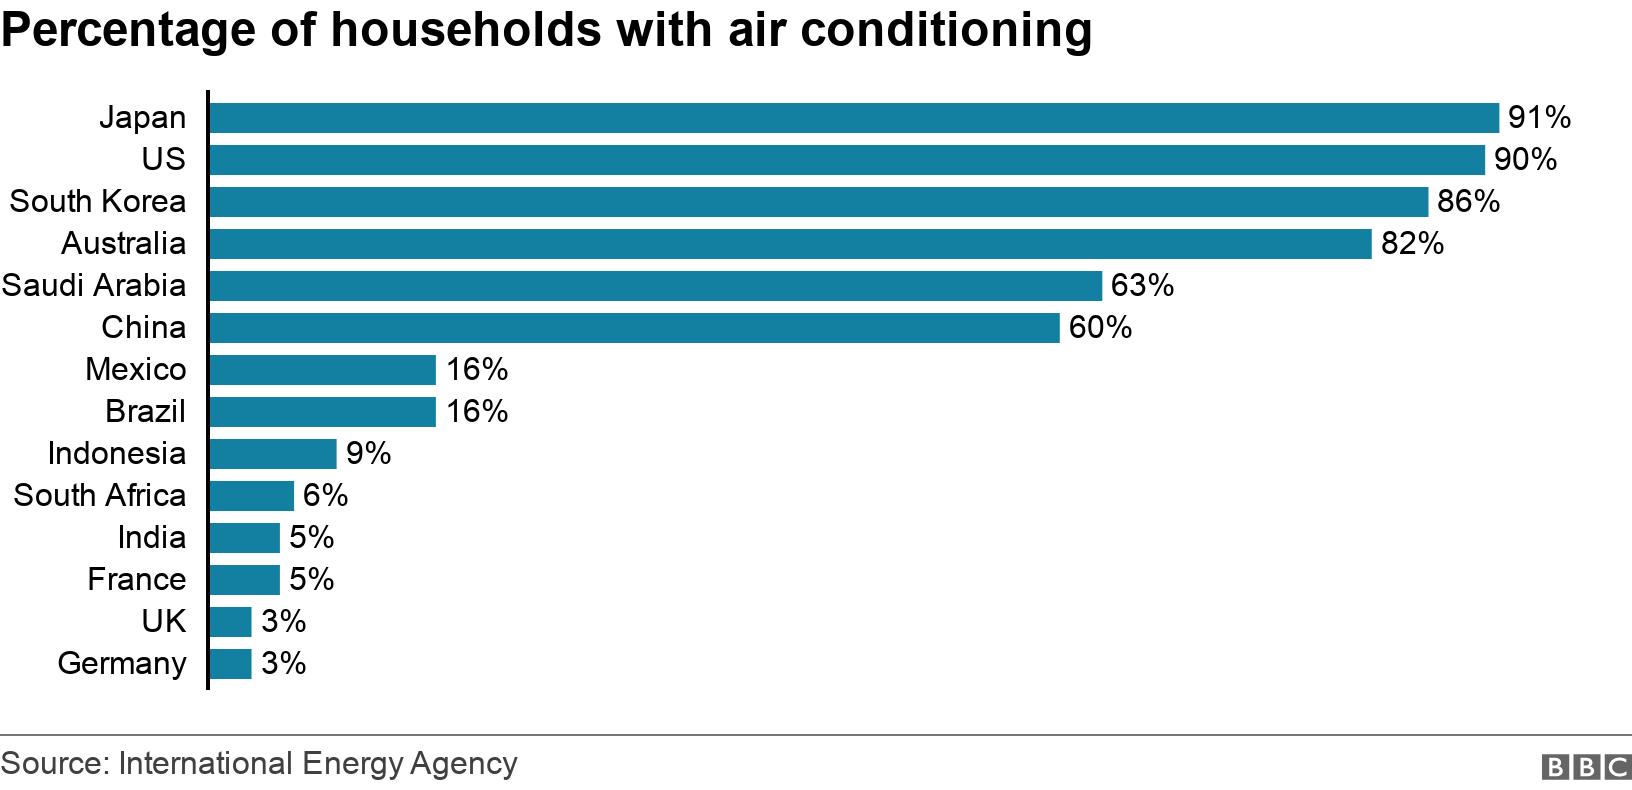 Percentage of households with air conditioning. . The graph shows varying rates of air conditioning ownership in various countries. Raging from 91% in Japan to 3% in the UK and Germany. .